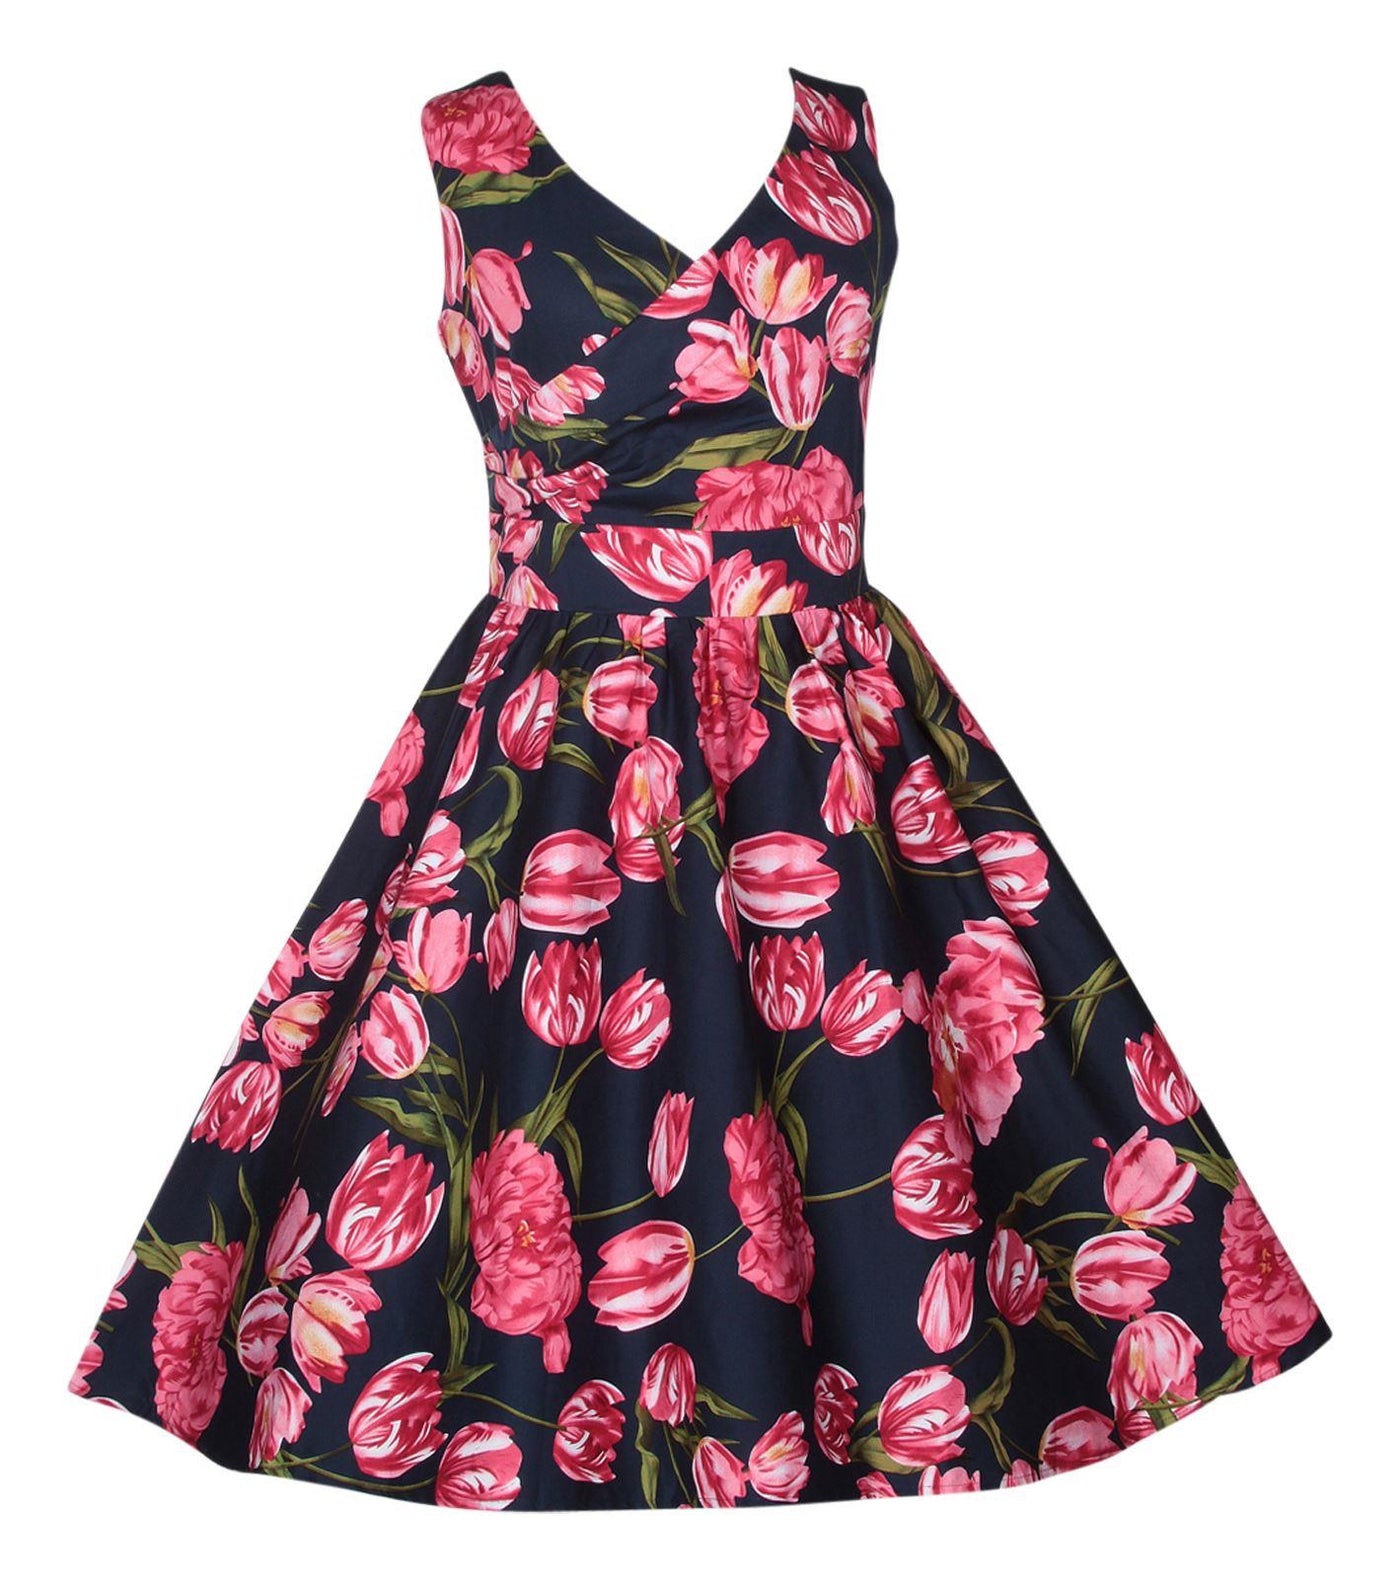 May V neck floral dress, in navy blue, with pink tulips, side view